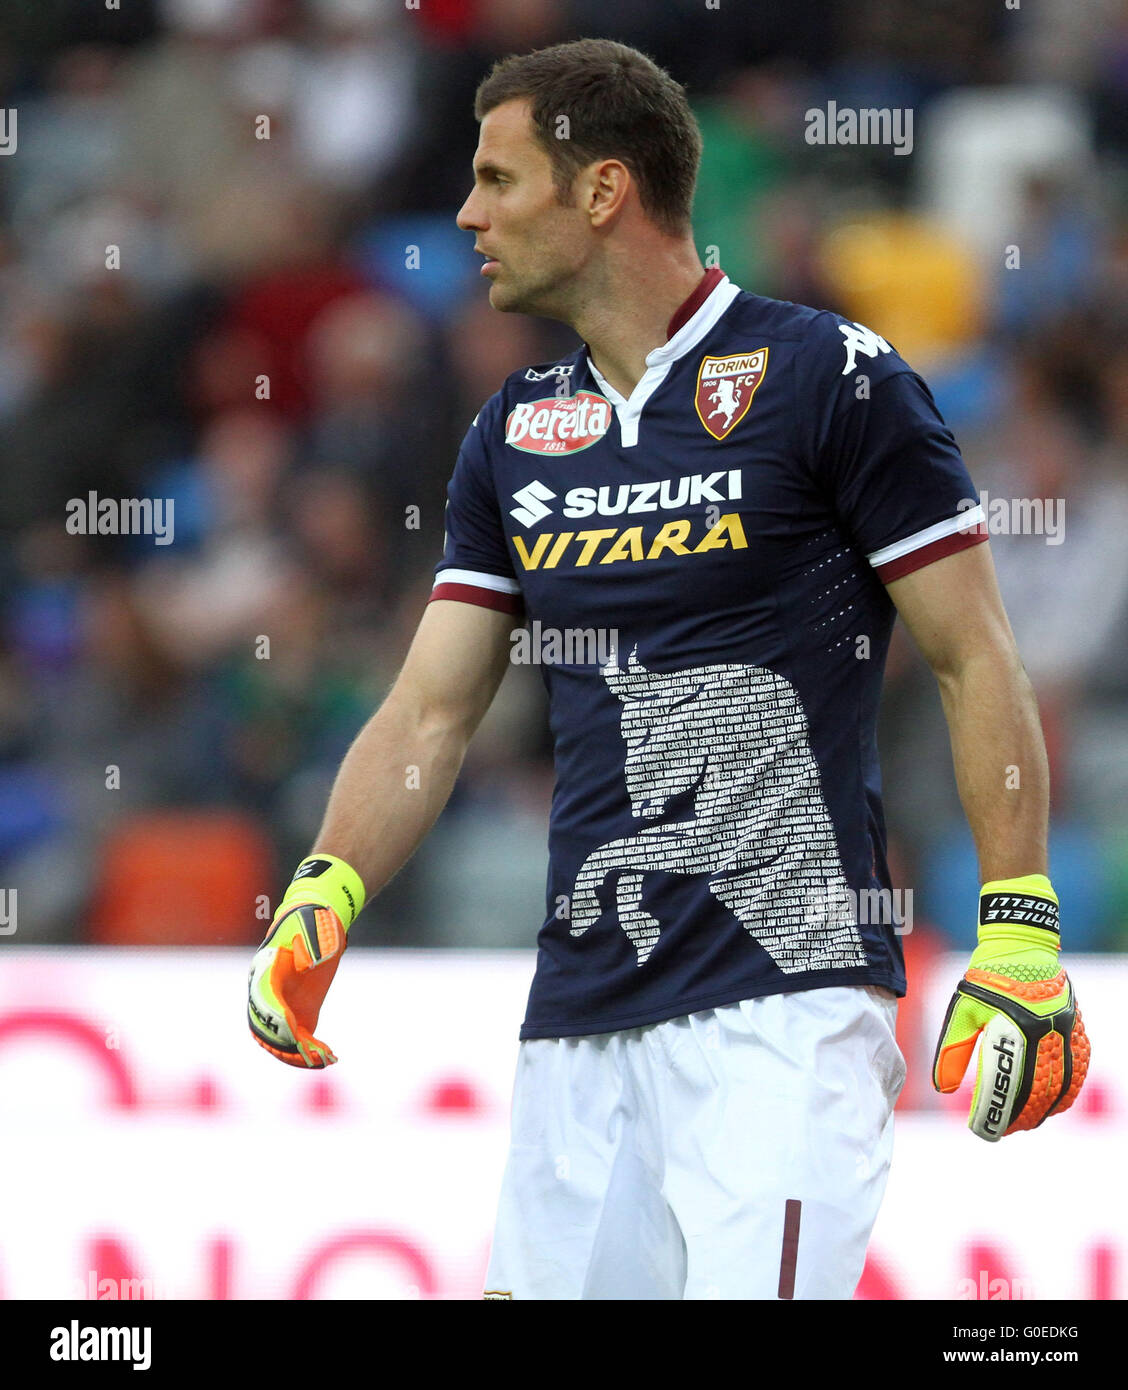 Udine, Italy. 30th April, 2016. Torino's goalkeeper Daniele Padelli looks  during the Italian Serie A football match between Udinese Calcio v Torino  FC on 30 April, 2016 at Dacia Arena in Udine.